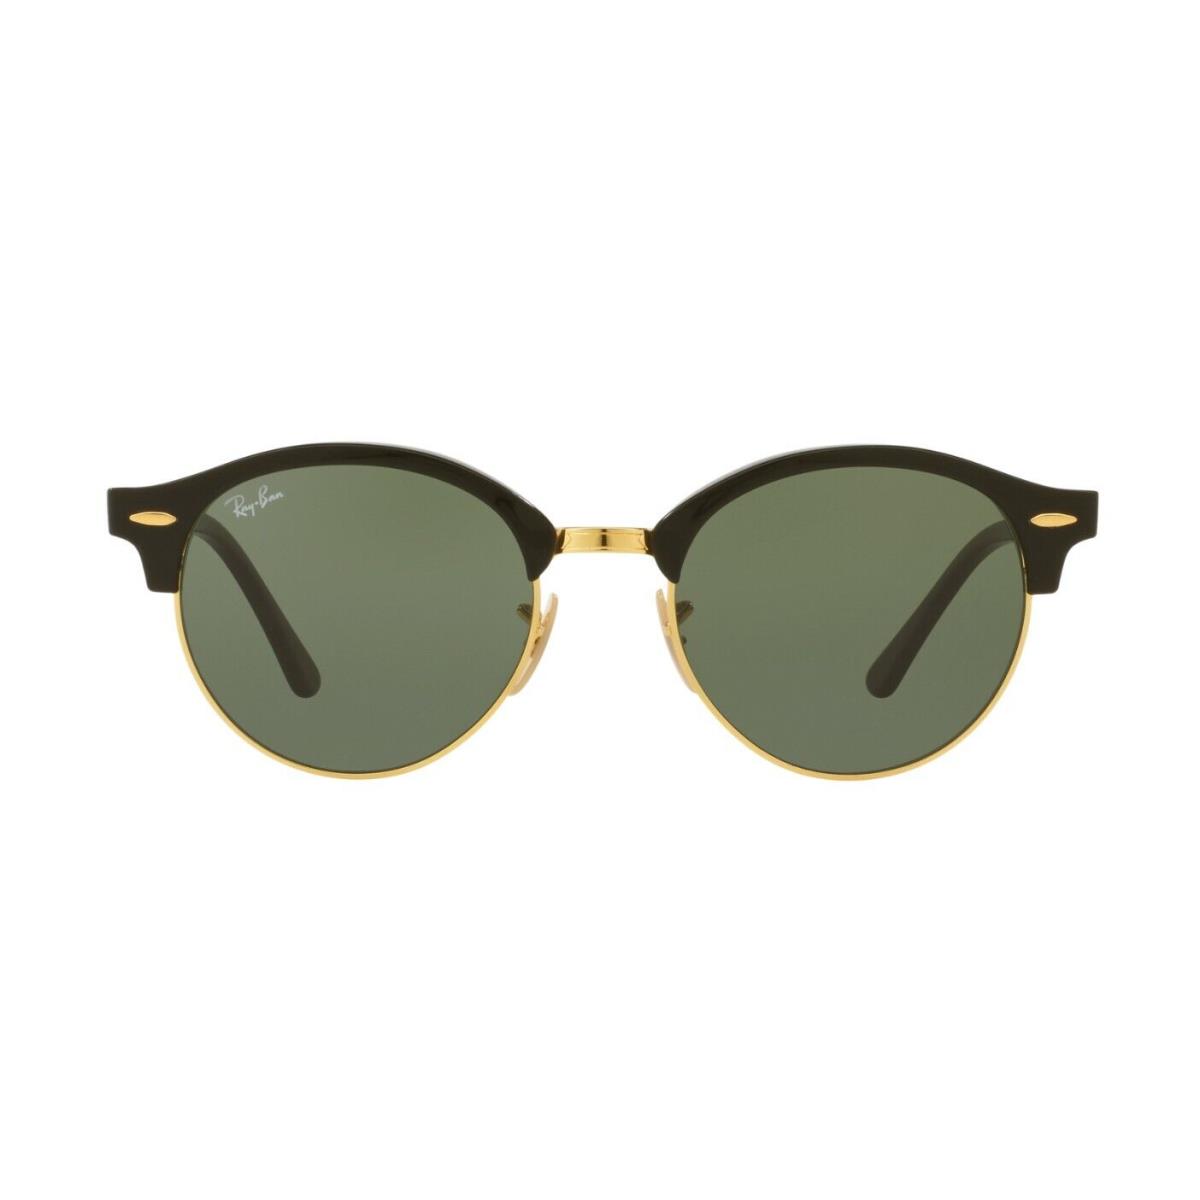 Ray-ban Clubround RB 4246 Black/G-15 Classic Green 901 Sunglasses